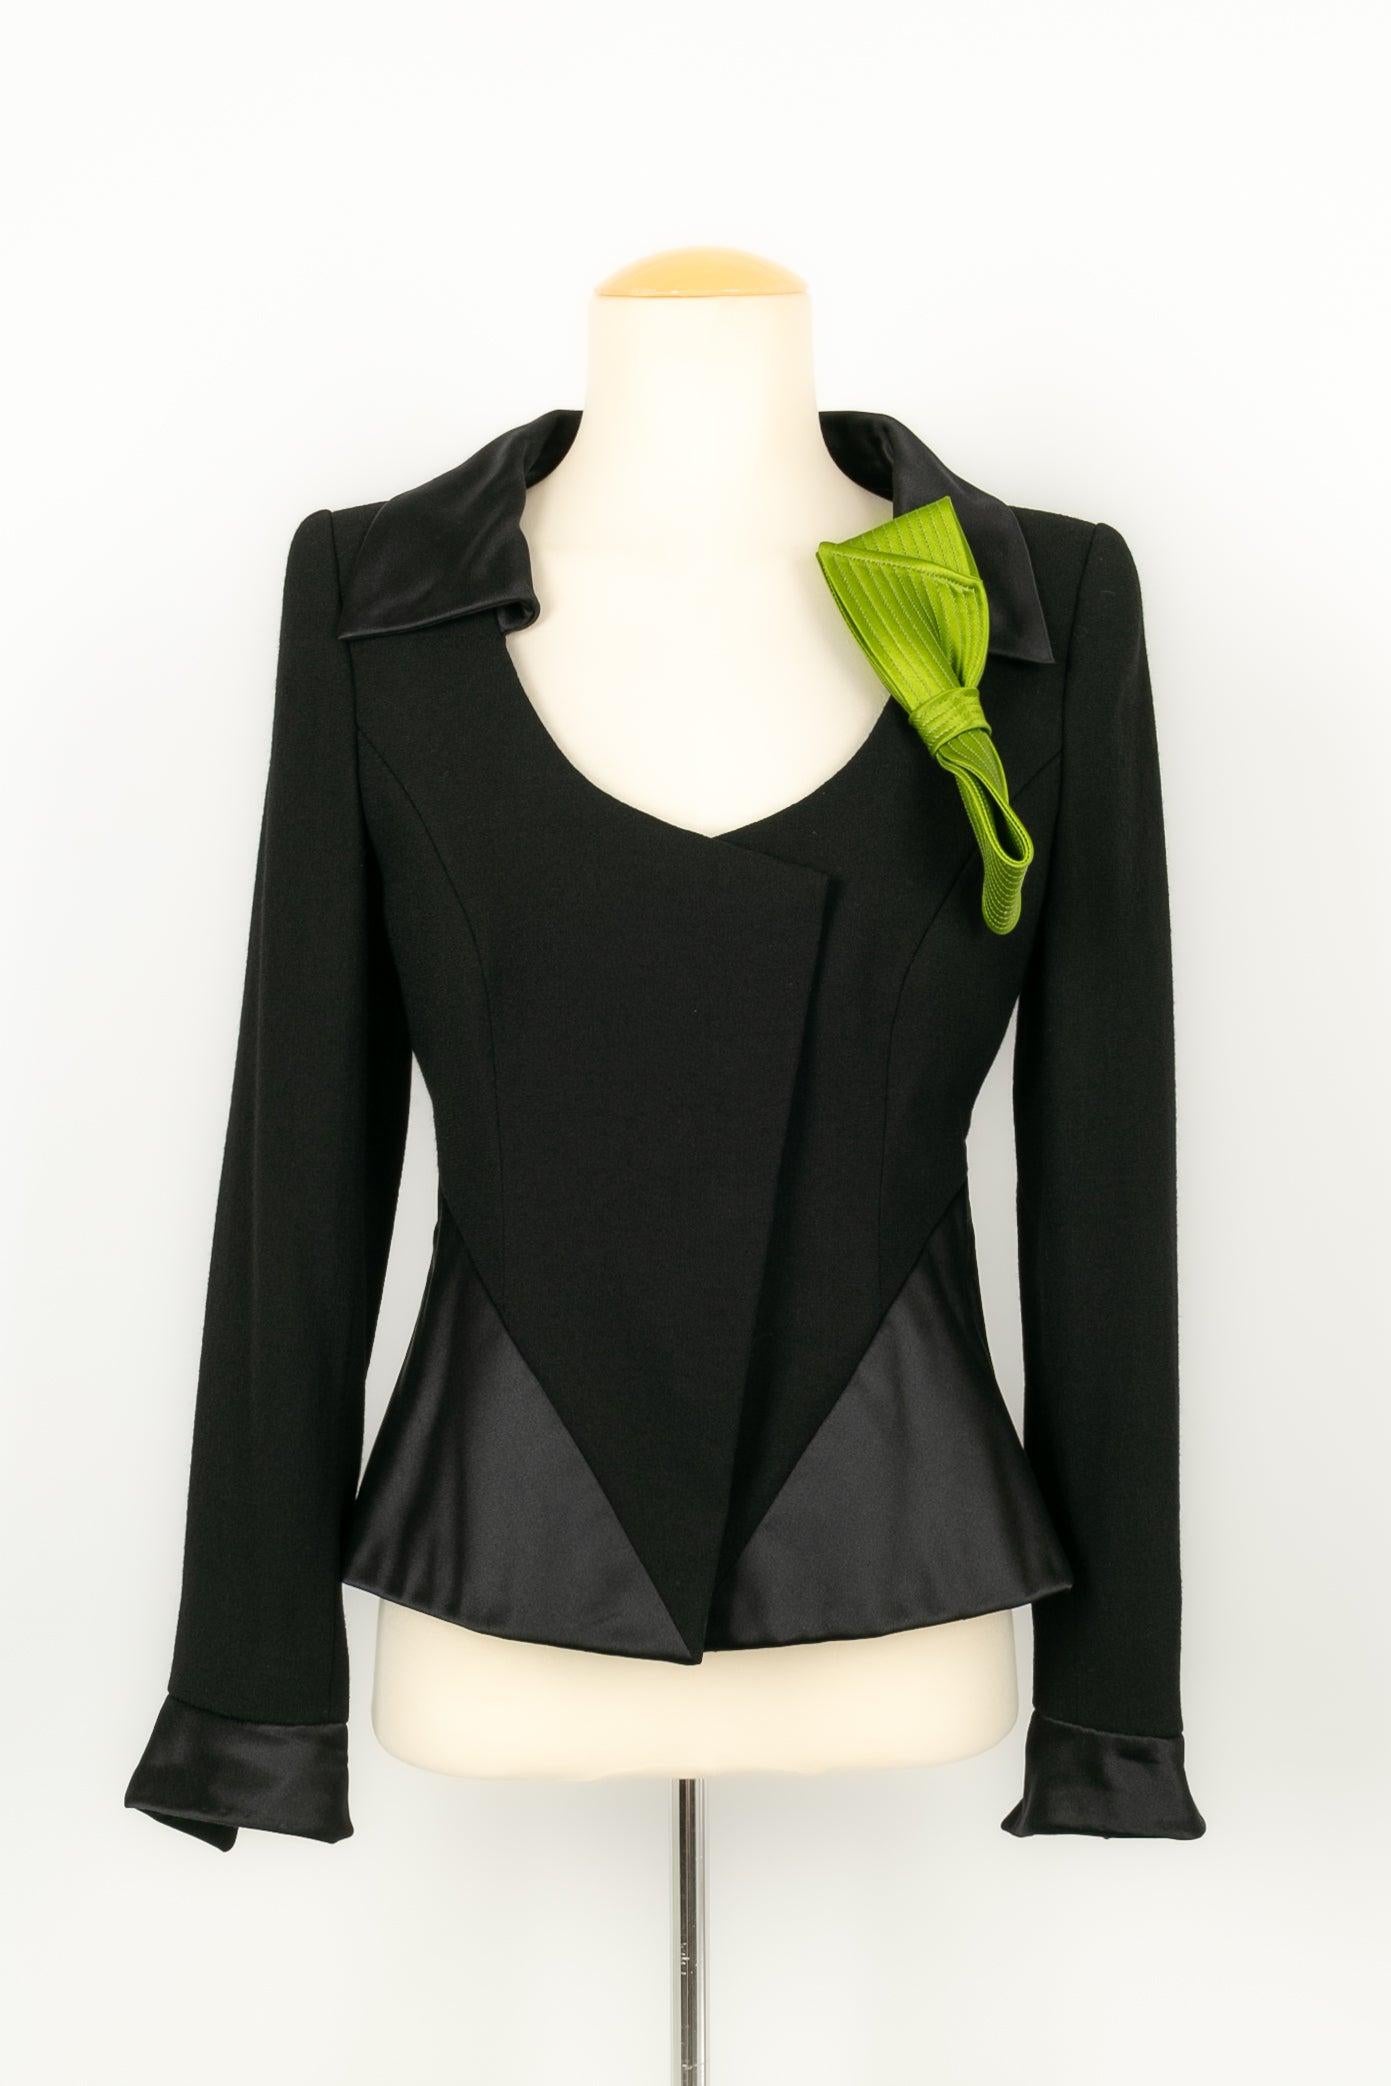 Christian Lacroix - Haute Couture set composed of a black jacket and a green silk bow-shaped brooch. The skirt is topped with black lace. No size indicated, it fits a 36FR.

Additional information:
Condition: Very good condition
Dimensions: Jacket: